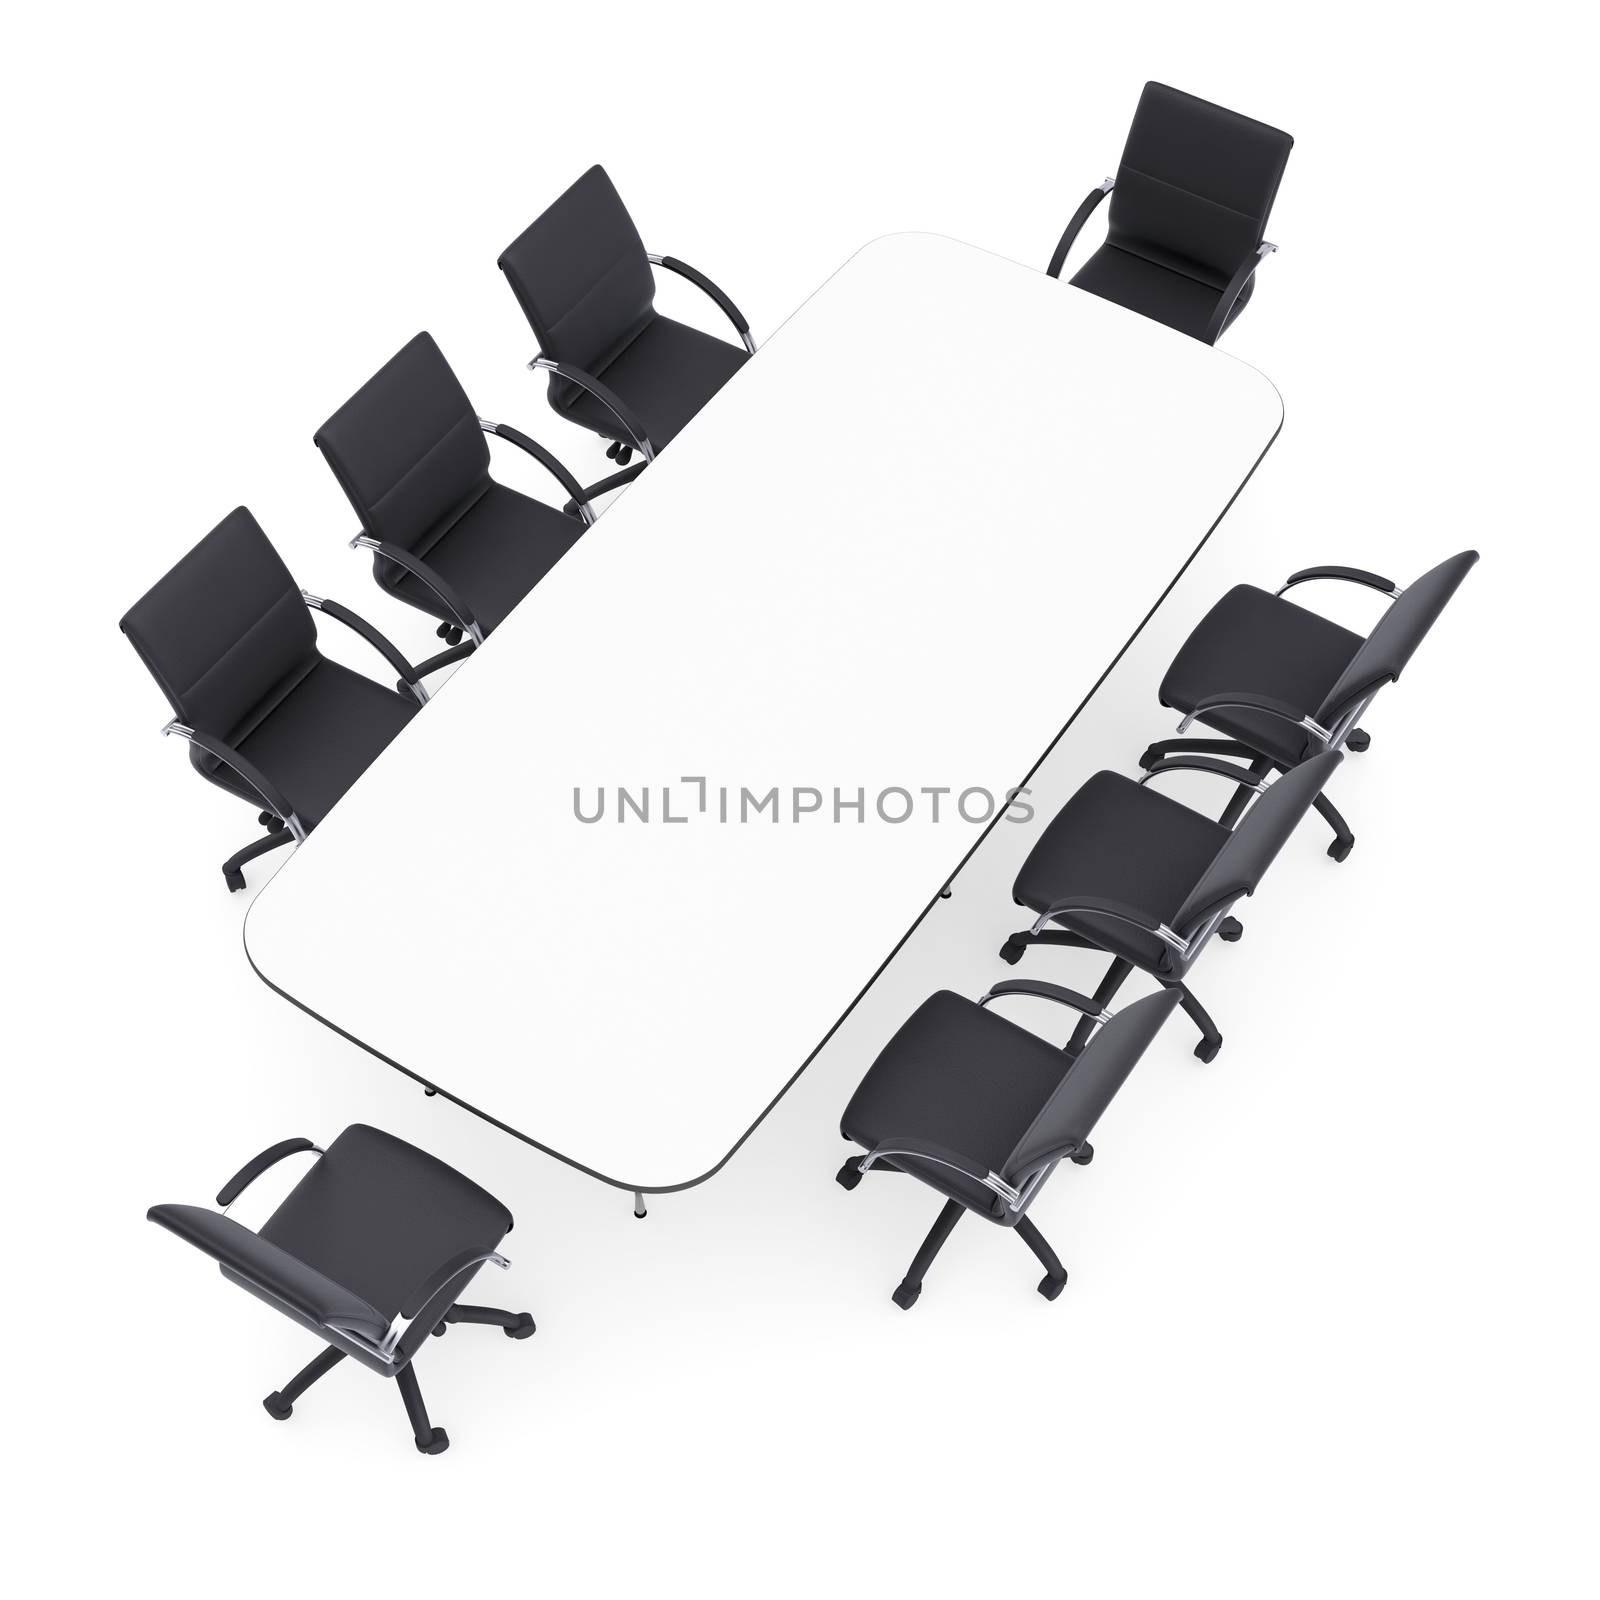 Office chairs and round table. Isolated render on a white background